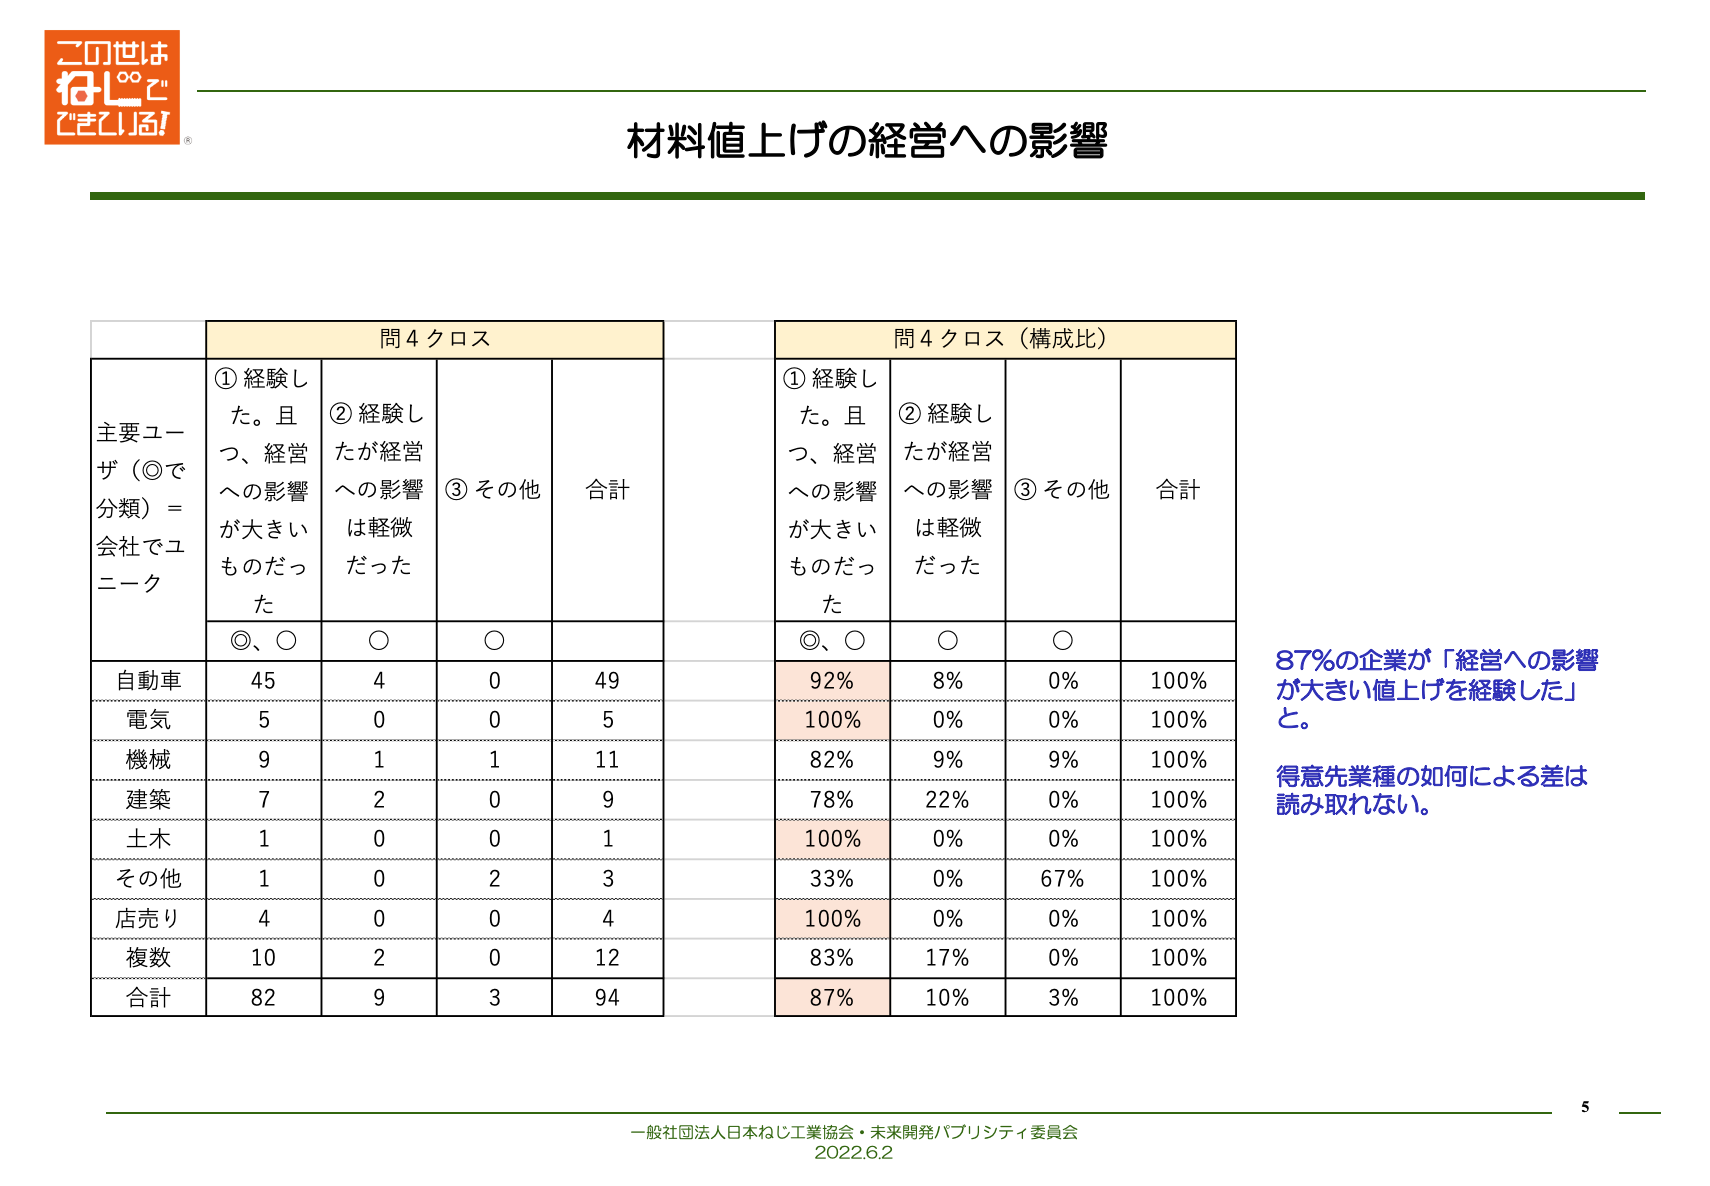 ５：Survey analysis results 2022-06-10 11.28.51.png